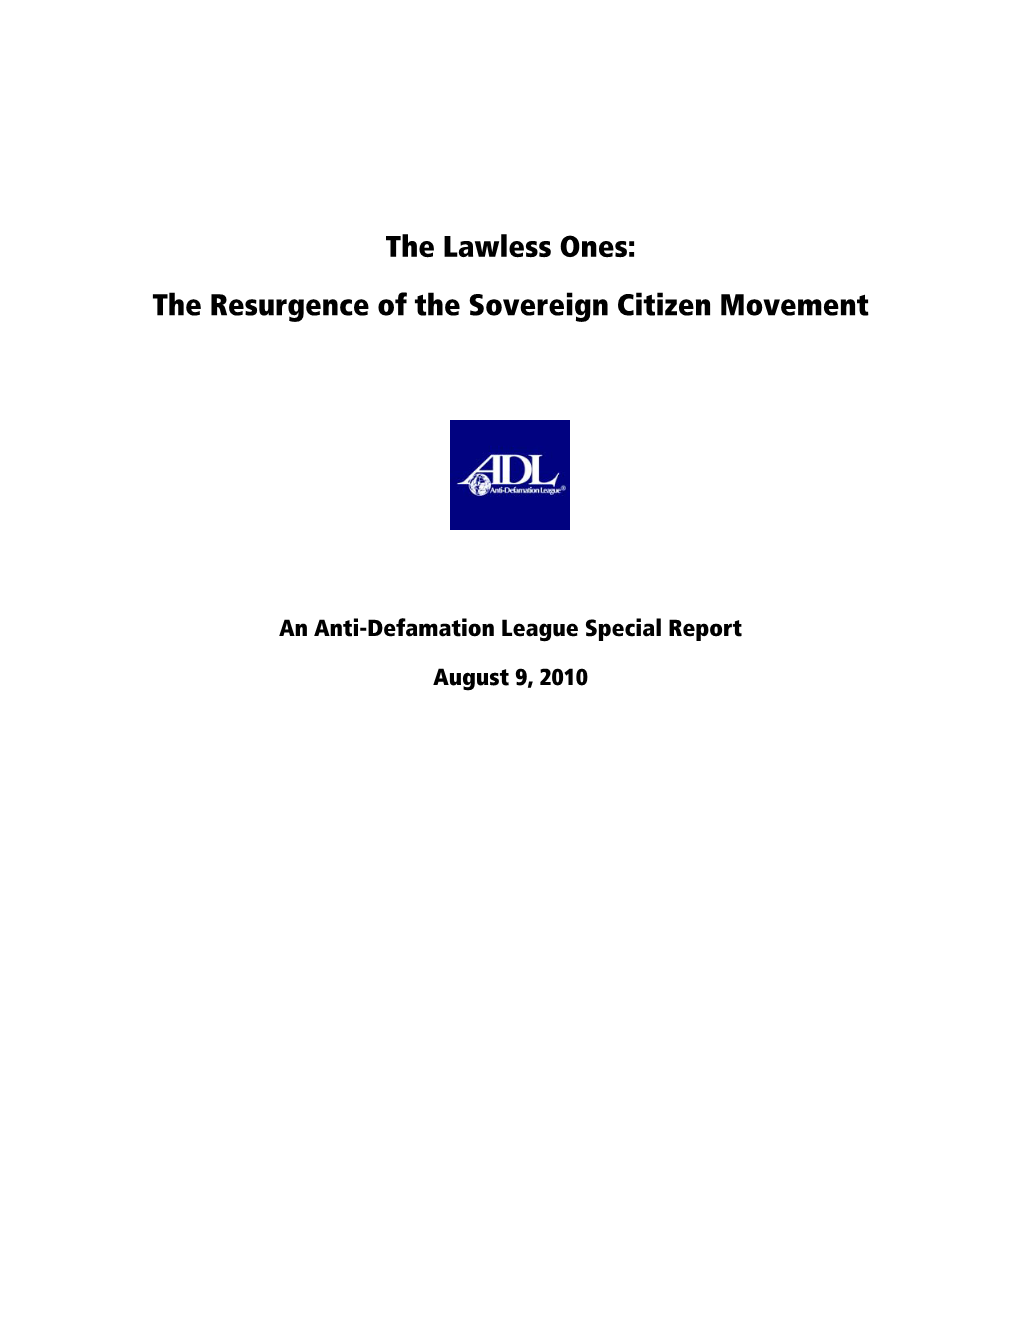 The Lawless Ones: the Resurgence of the Sovereign Citizen Movement